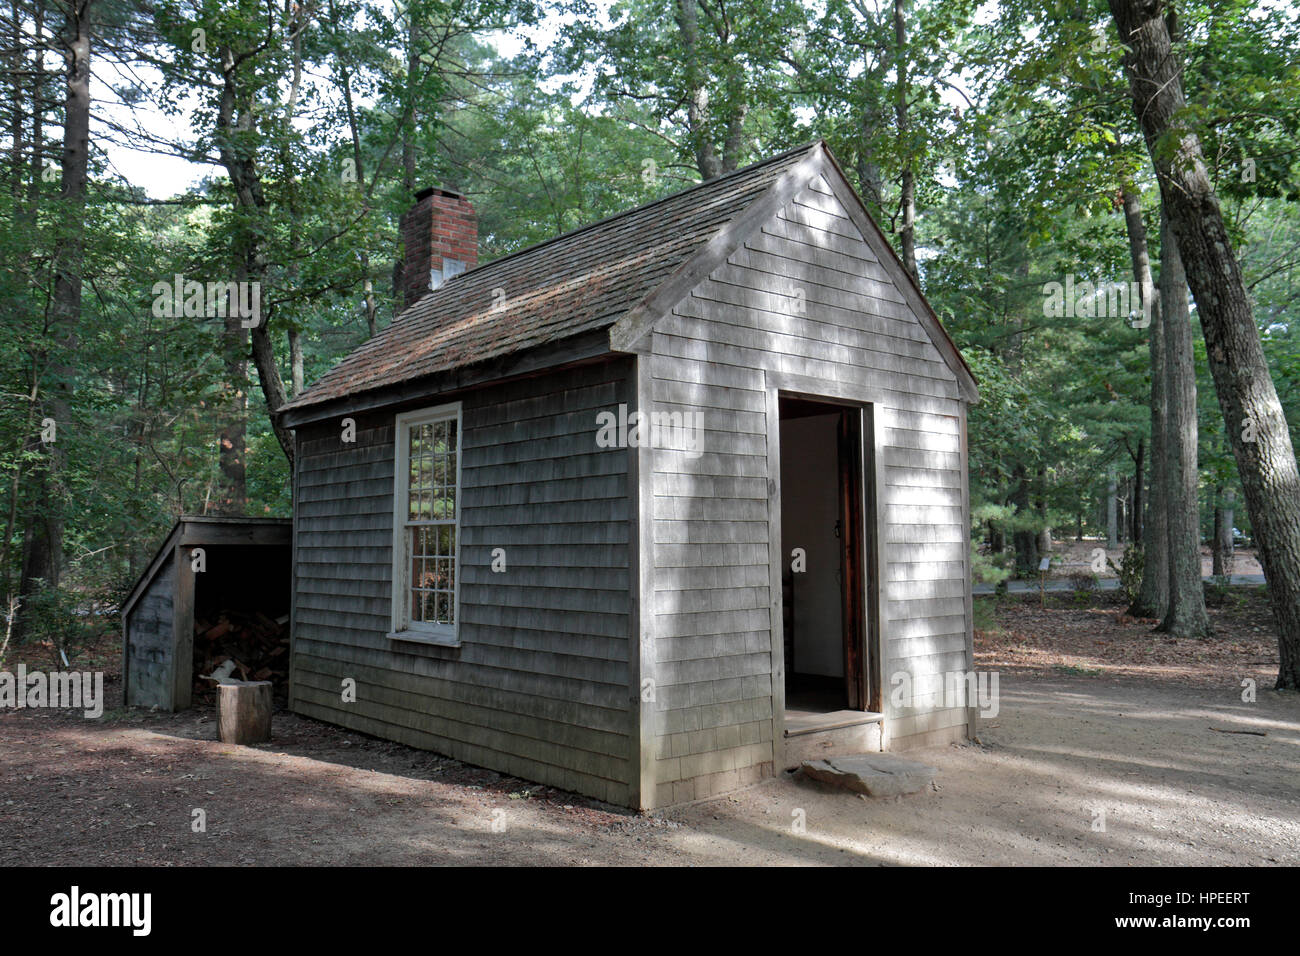 Replica of Henry David Thoreau's small hut beside Walden Woods, close to Walden Pond in Concord, Massachusetts, United States. Stock Photo